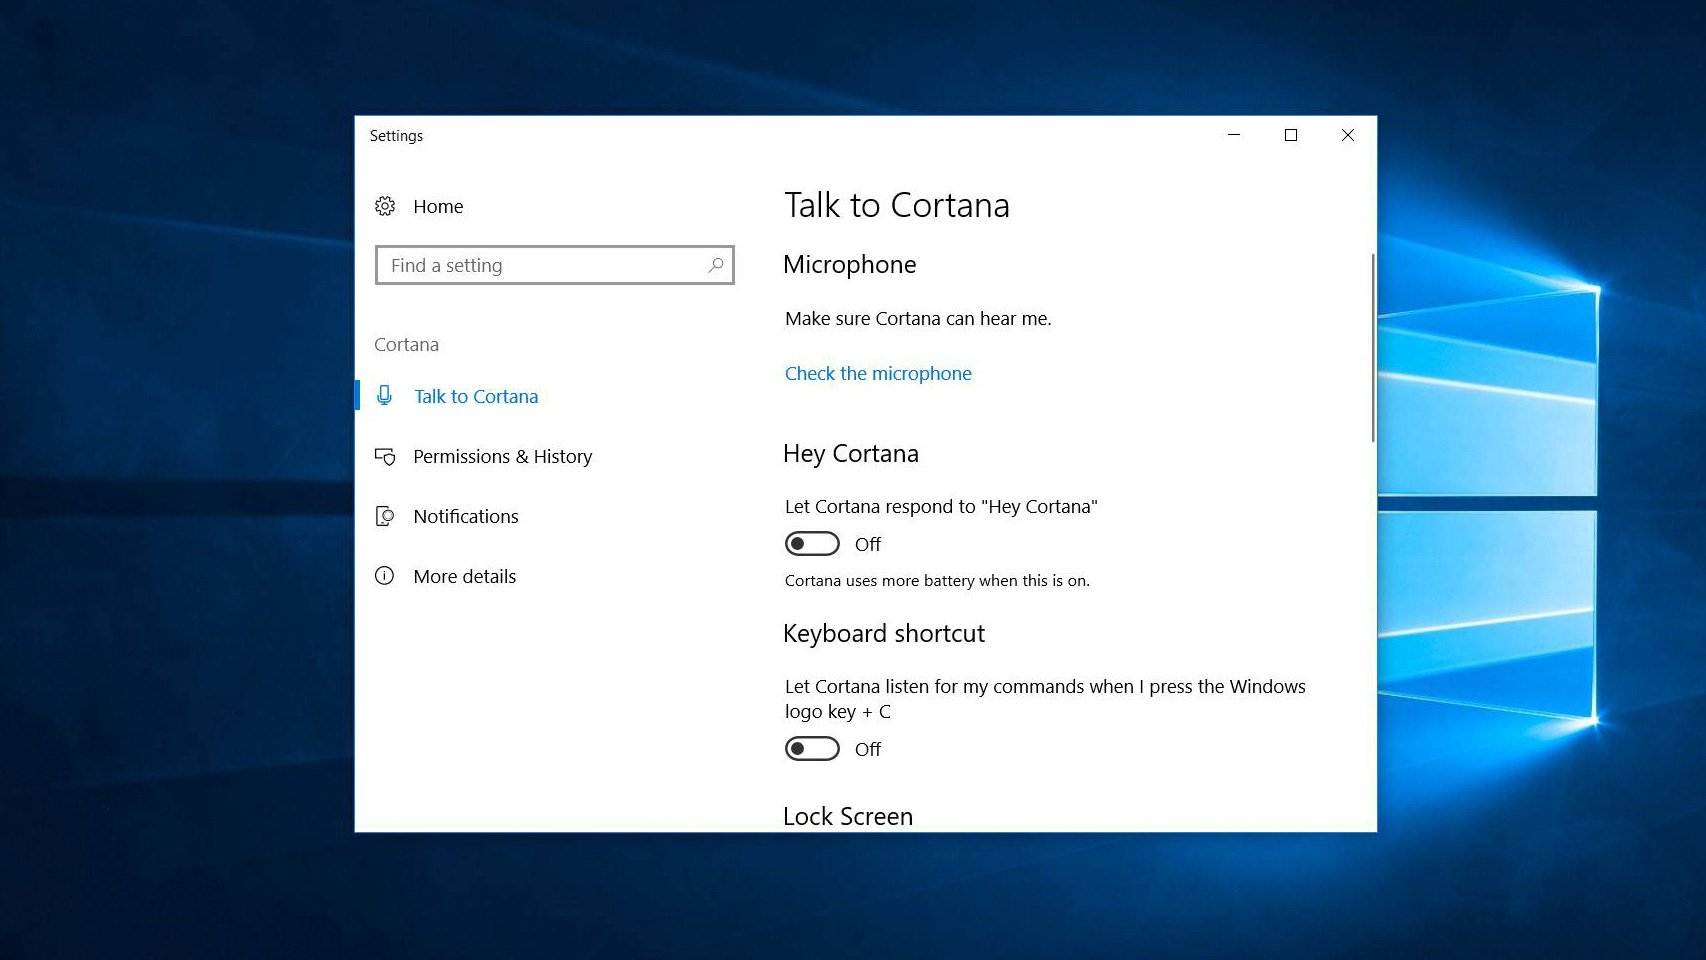 Disable Cortana – Cortana can sometimes cause mouse stuttering issues on Windows 10. To disable it, go to the Start menu, click on the gear icon to open Settings, select Cortana, and toggle off the switch.
Update your computer's drivers – Outdated or corrupted drivers can cause mouse stuttering. You can update your drivers manually or use a driver updater software for a quicker and easier process.